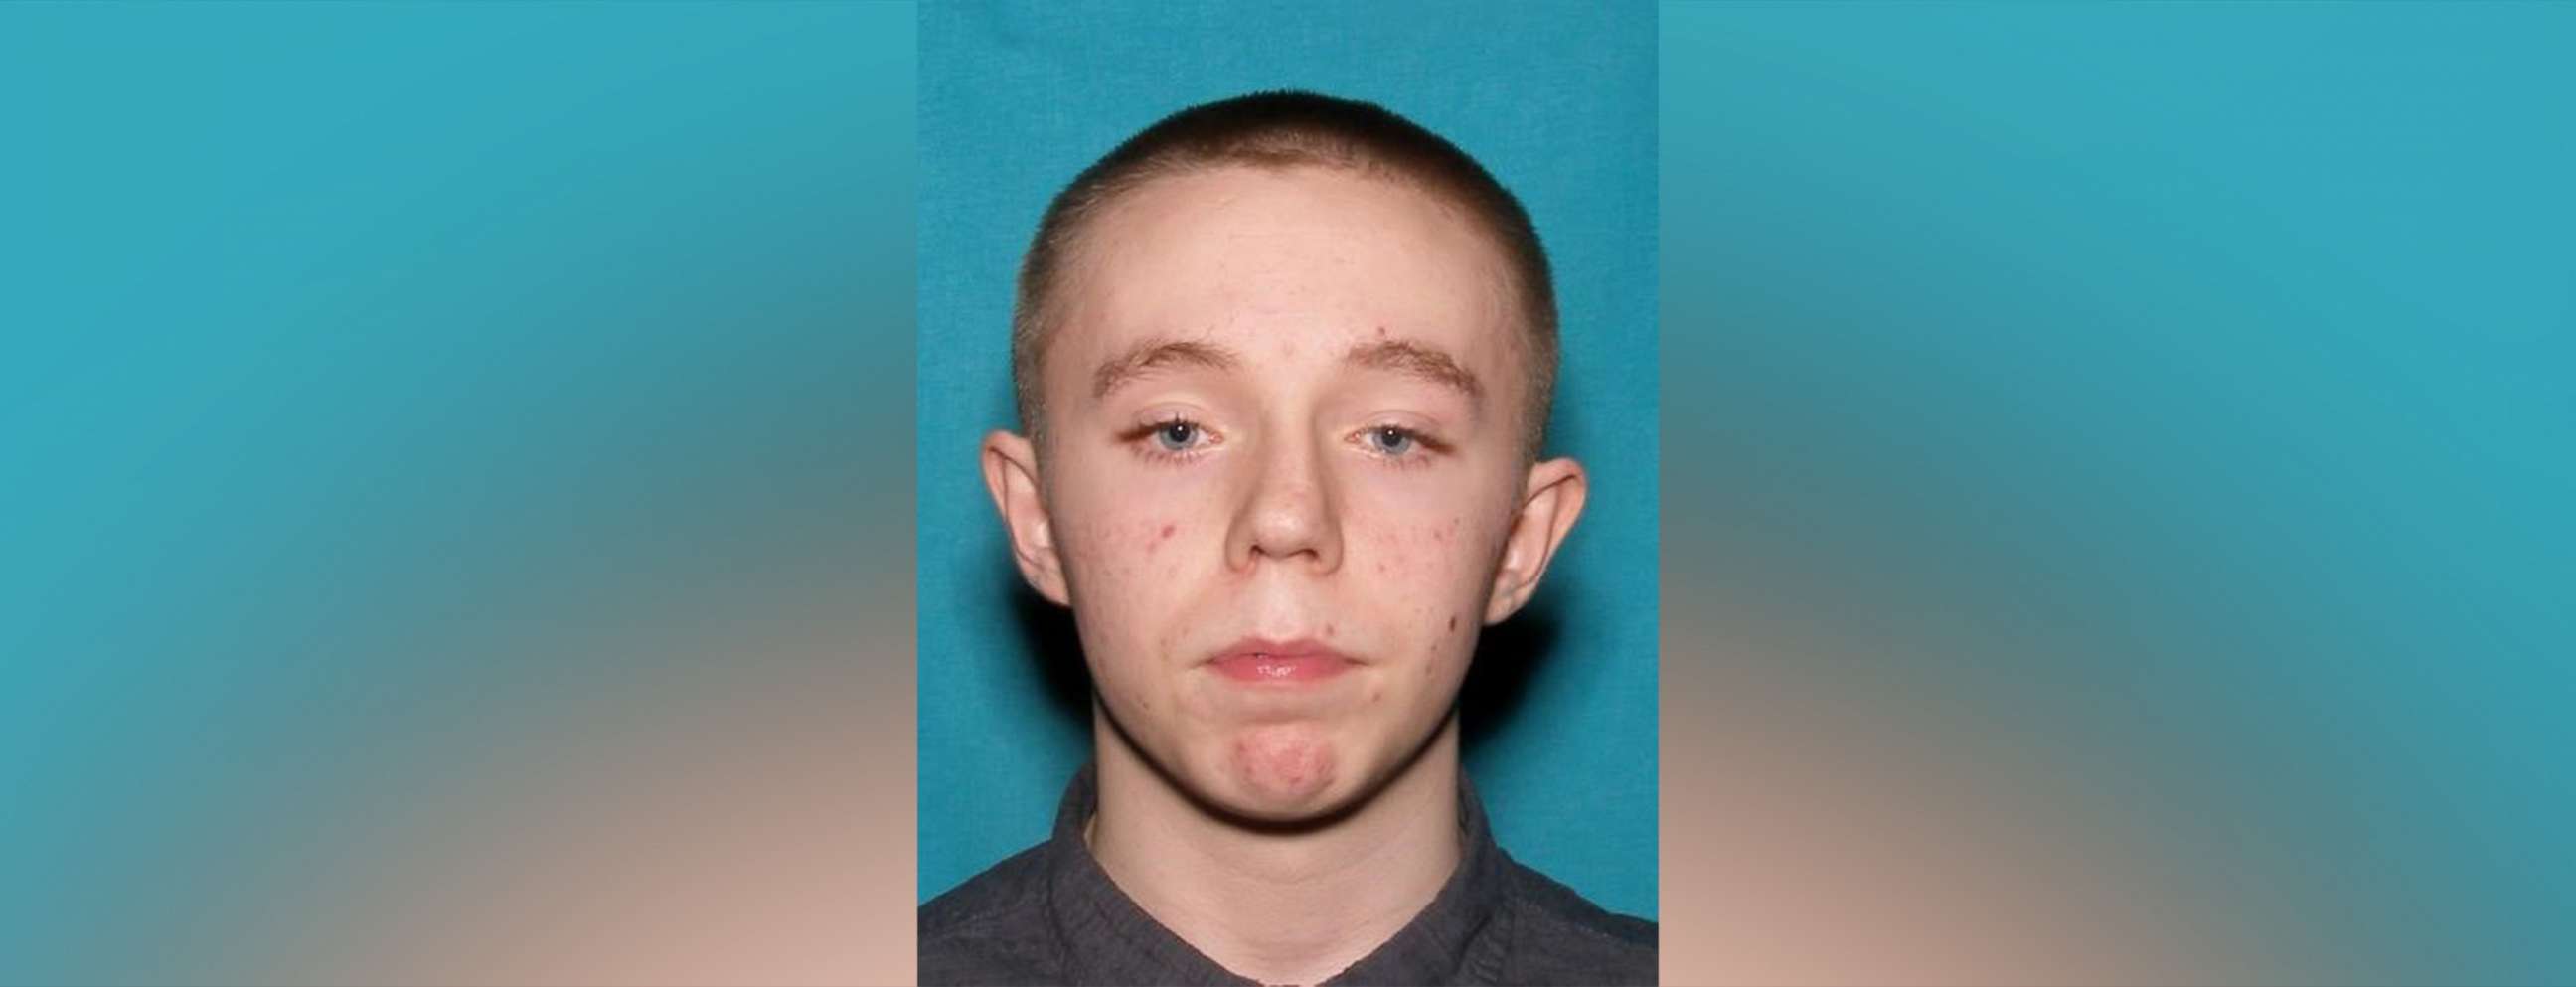 PHOTO: The Indianapolis Metropolitan Police Department has released an undated image of Brandon Hole who allegedly shot and killed eight people at a FedEx facility in Indianapolis on April 16, 2021.